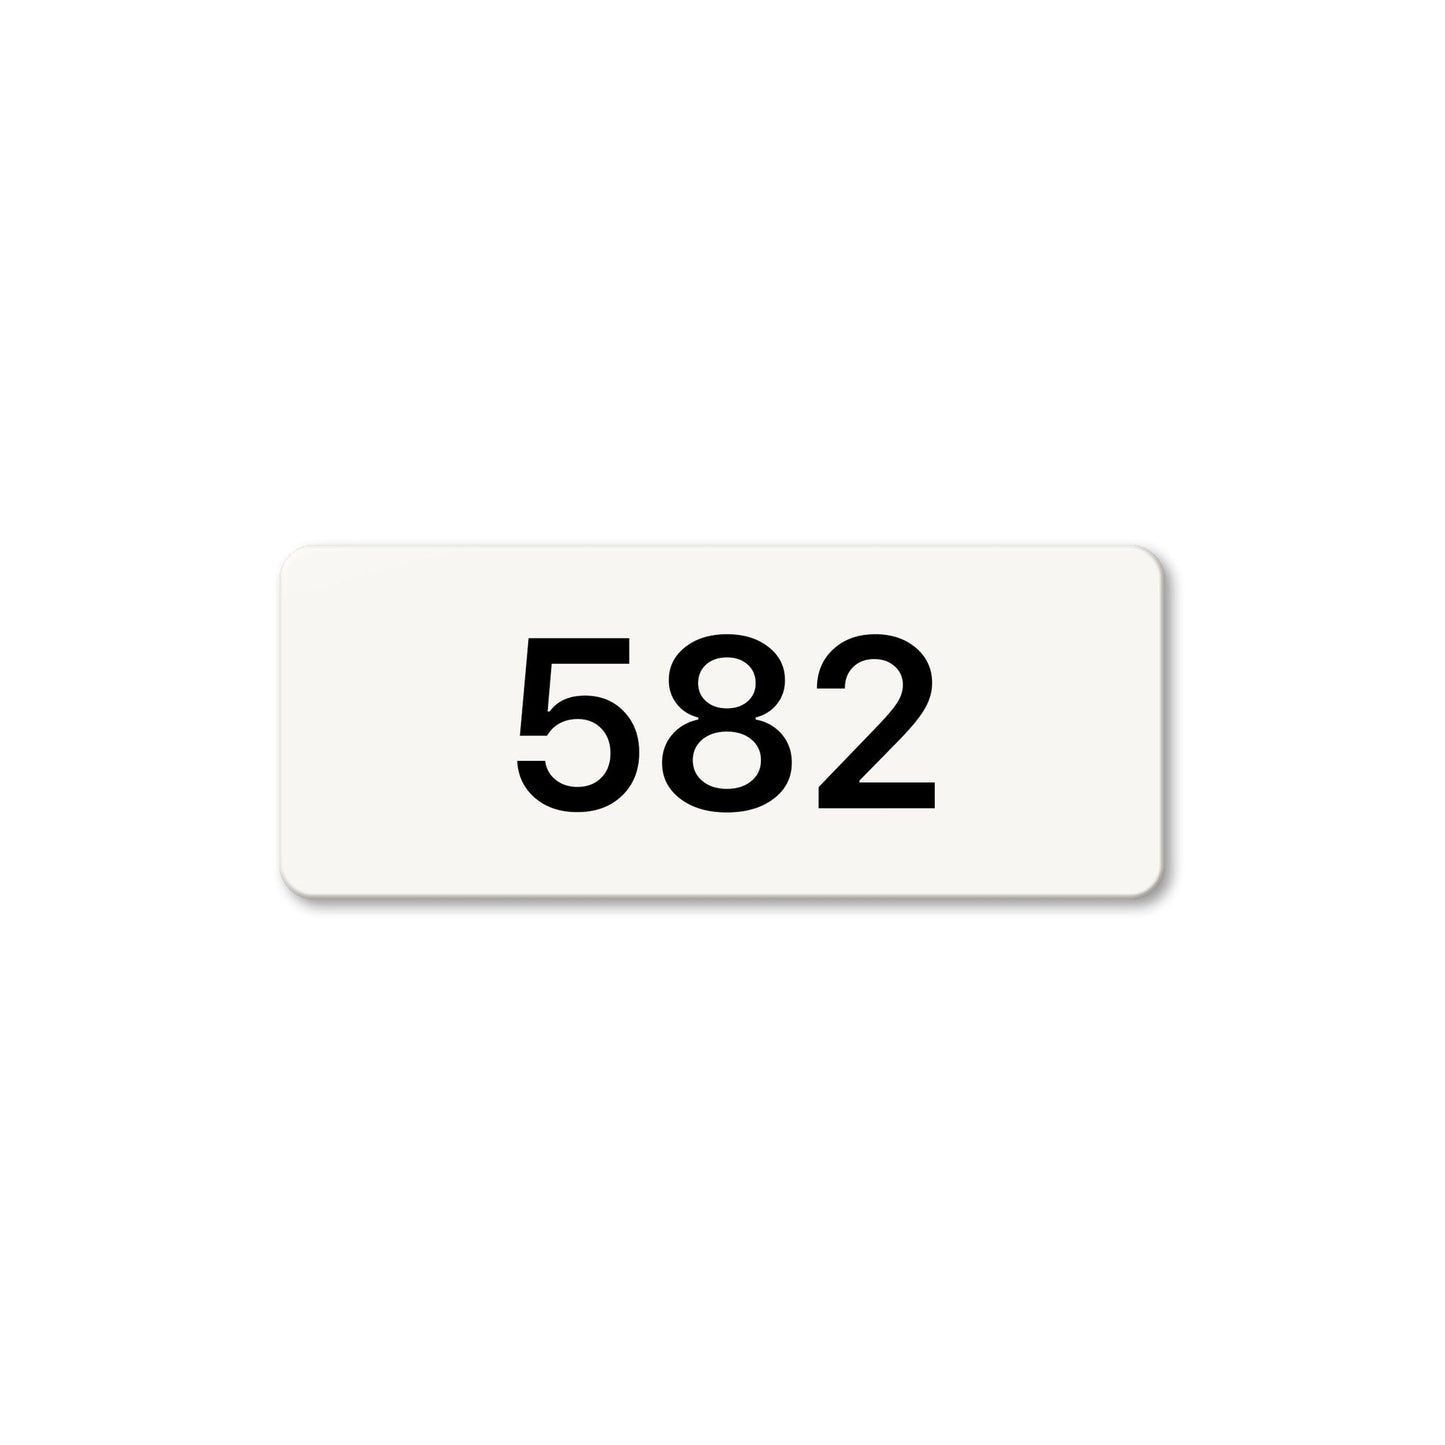 Numeral 582